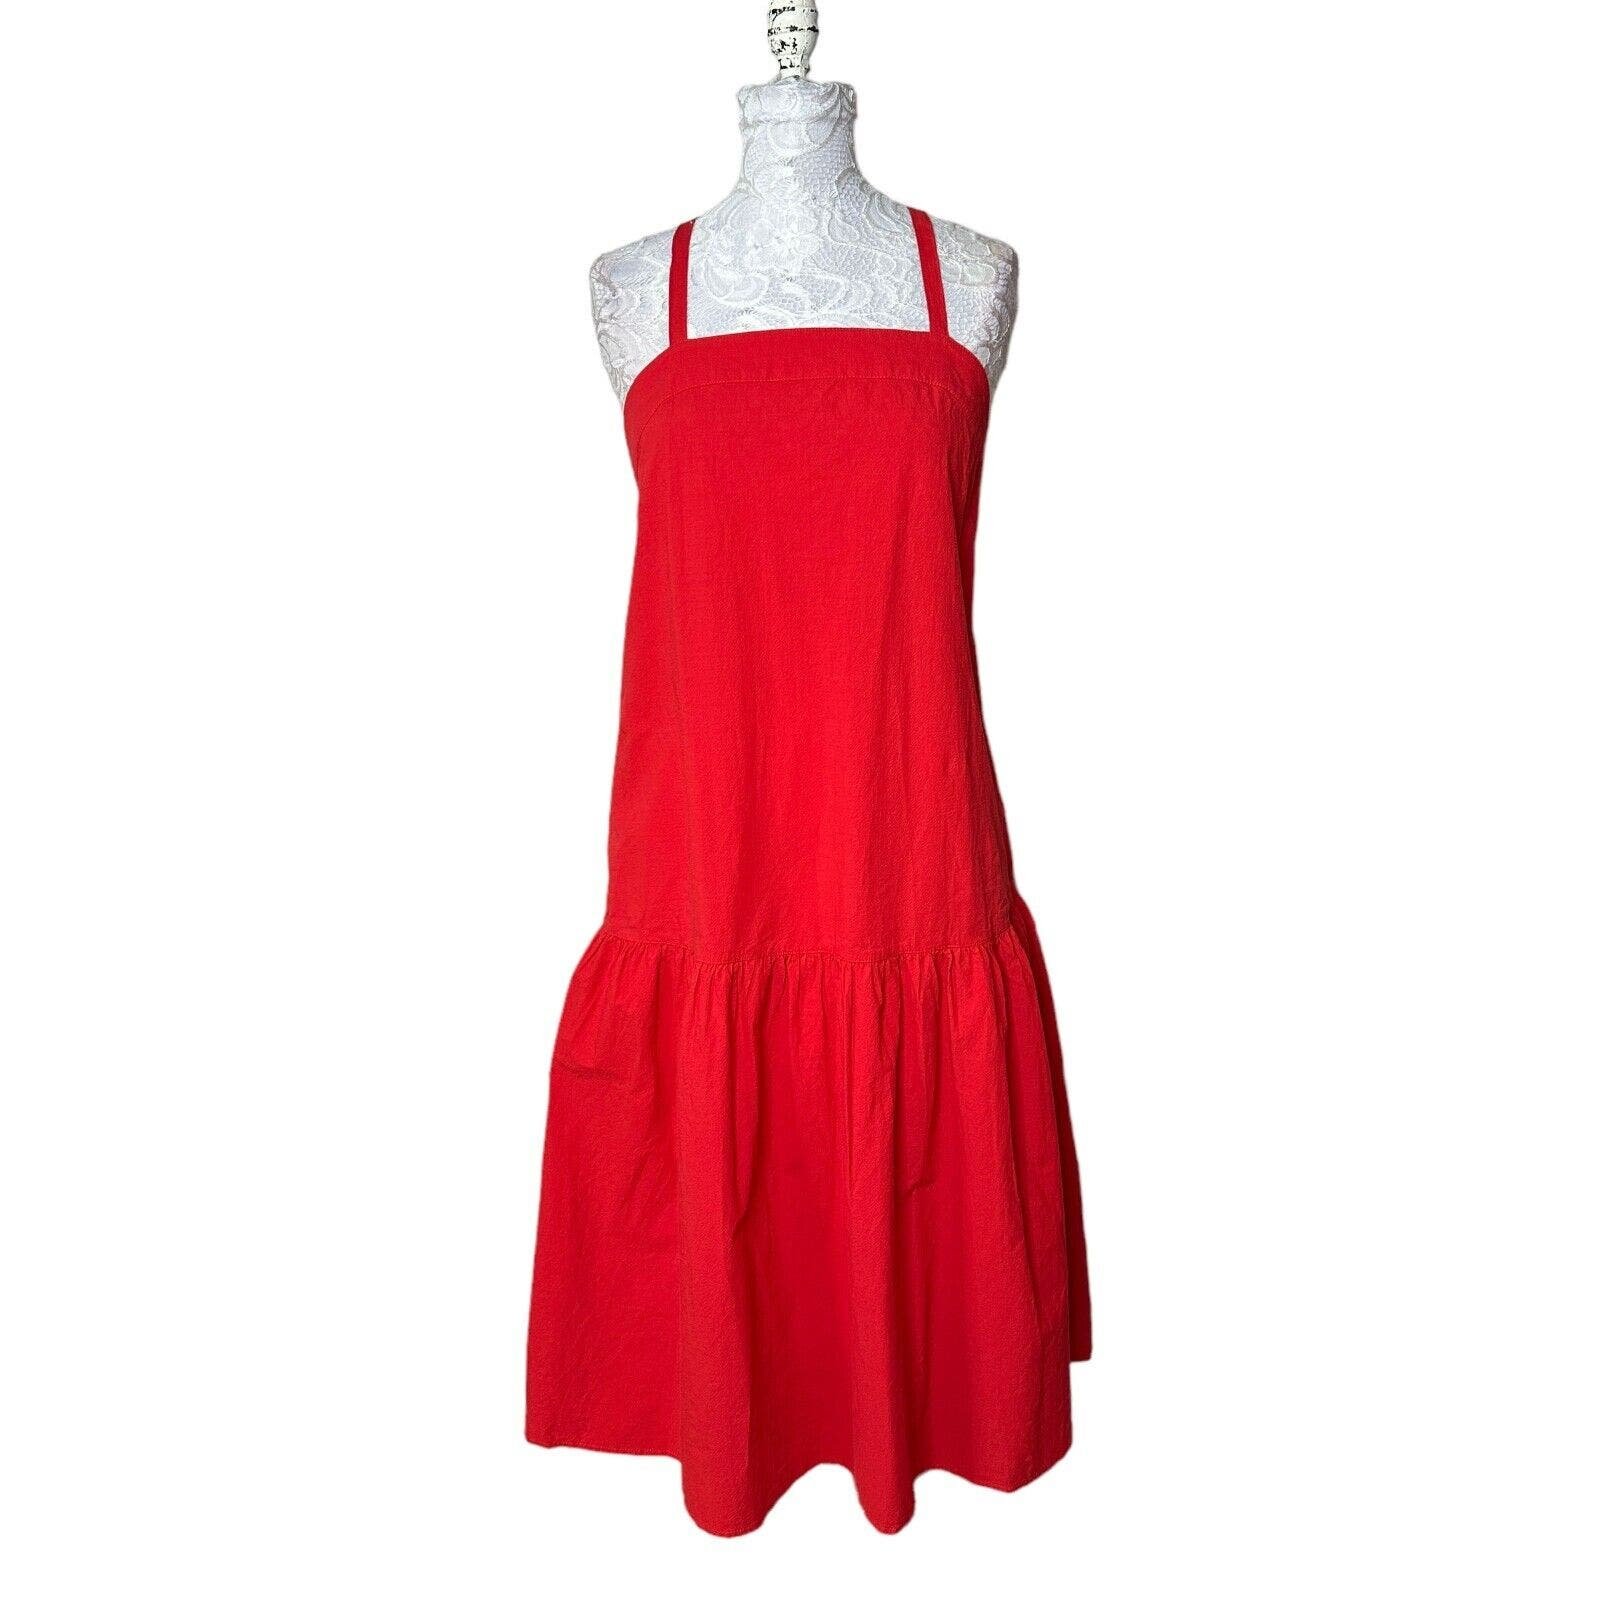 Everlane The Pinafore Dress Jacquard in Scarlet Red Sle